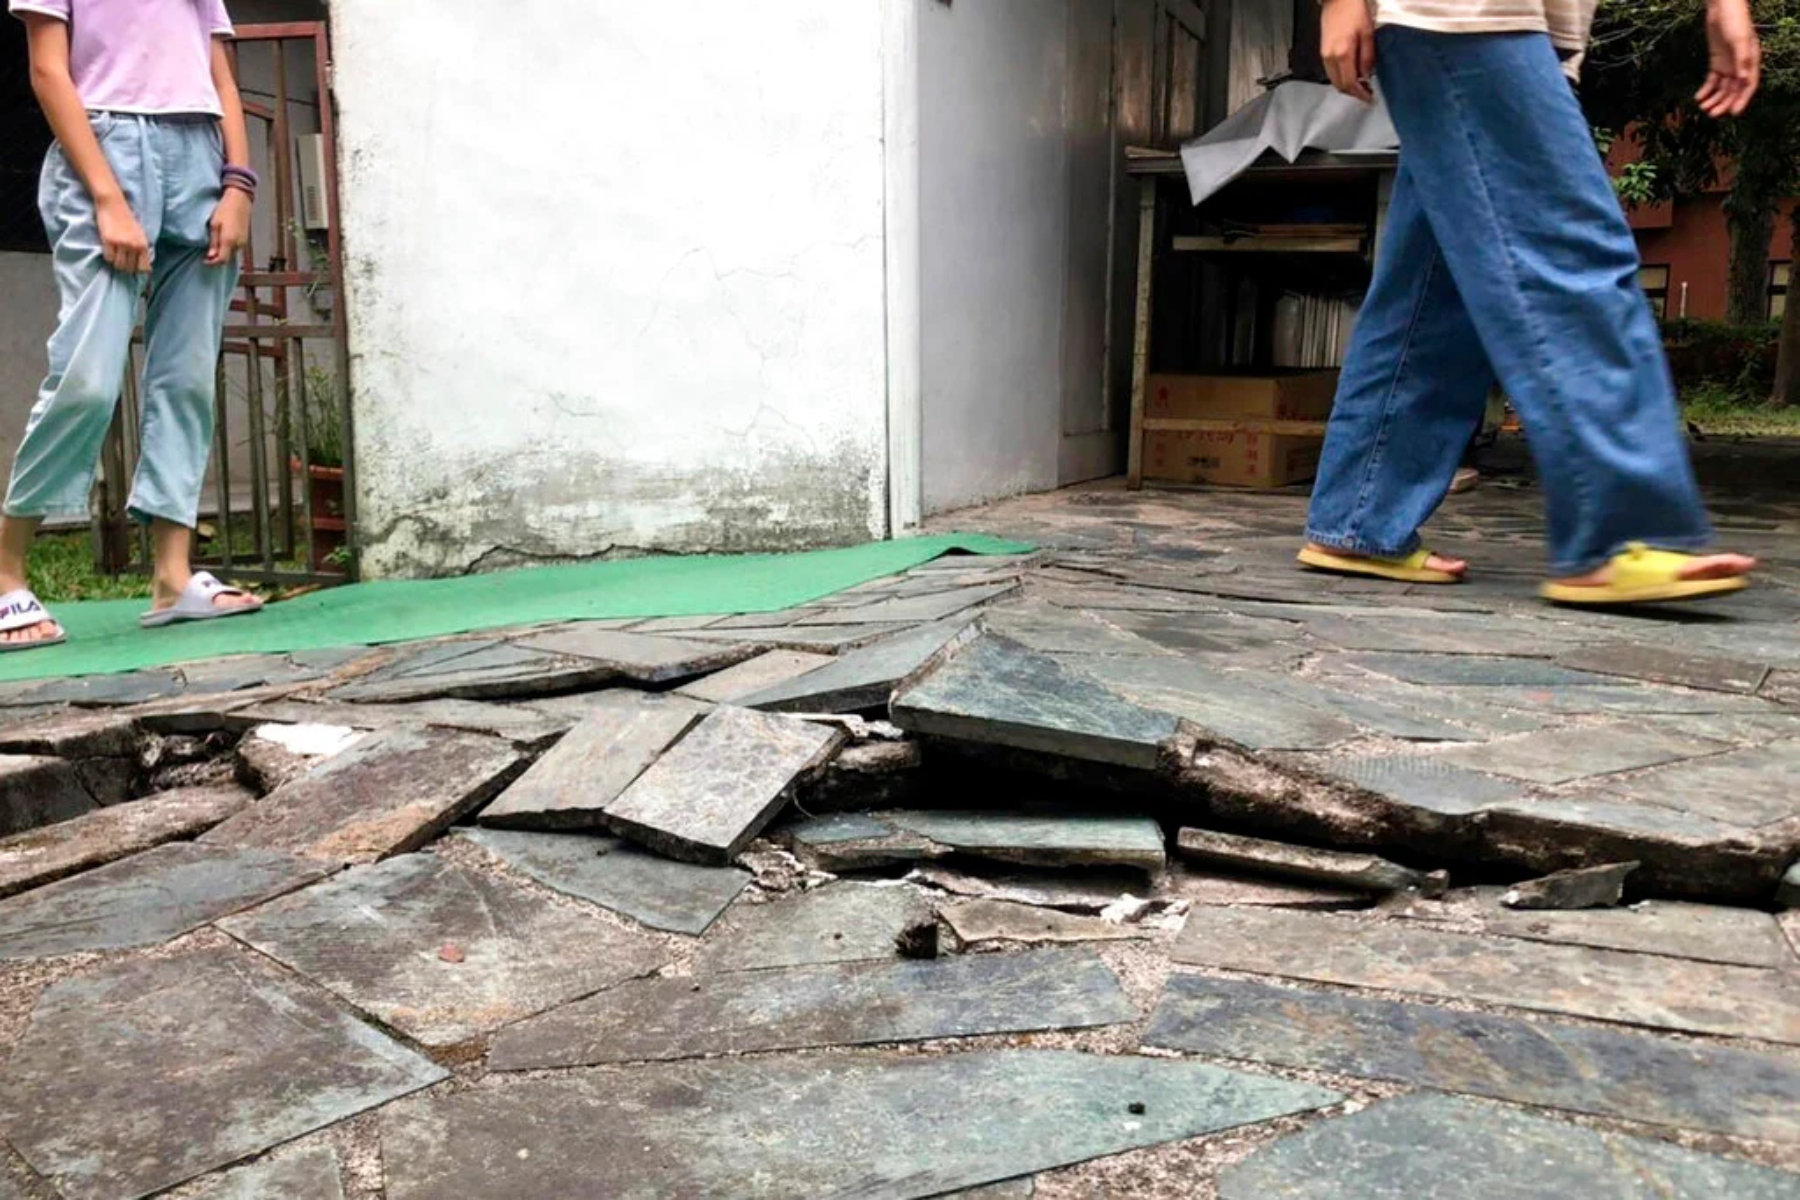 Cracks in the floor after a powerful earthquake in Taiwan, with two people walking beside it